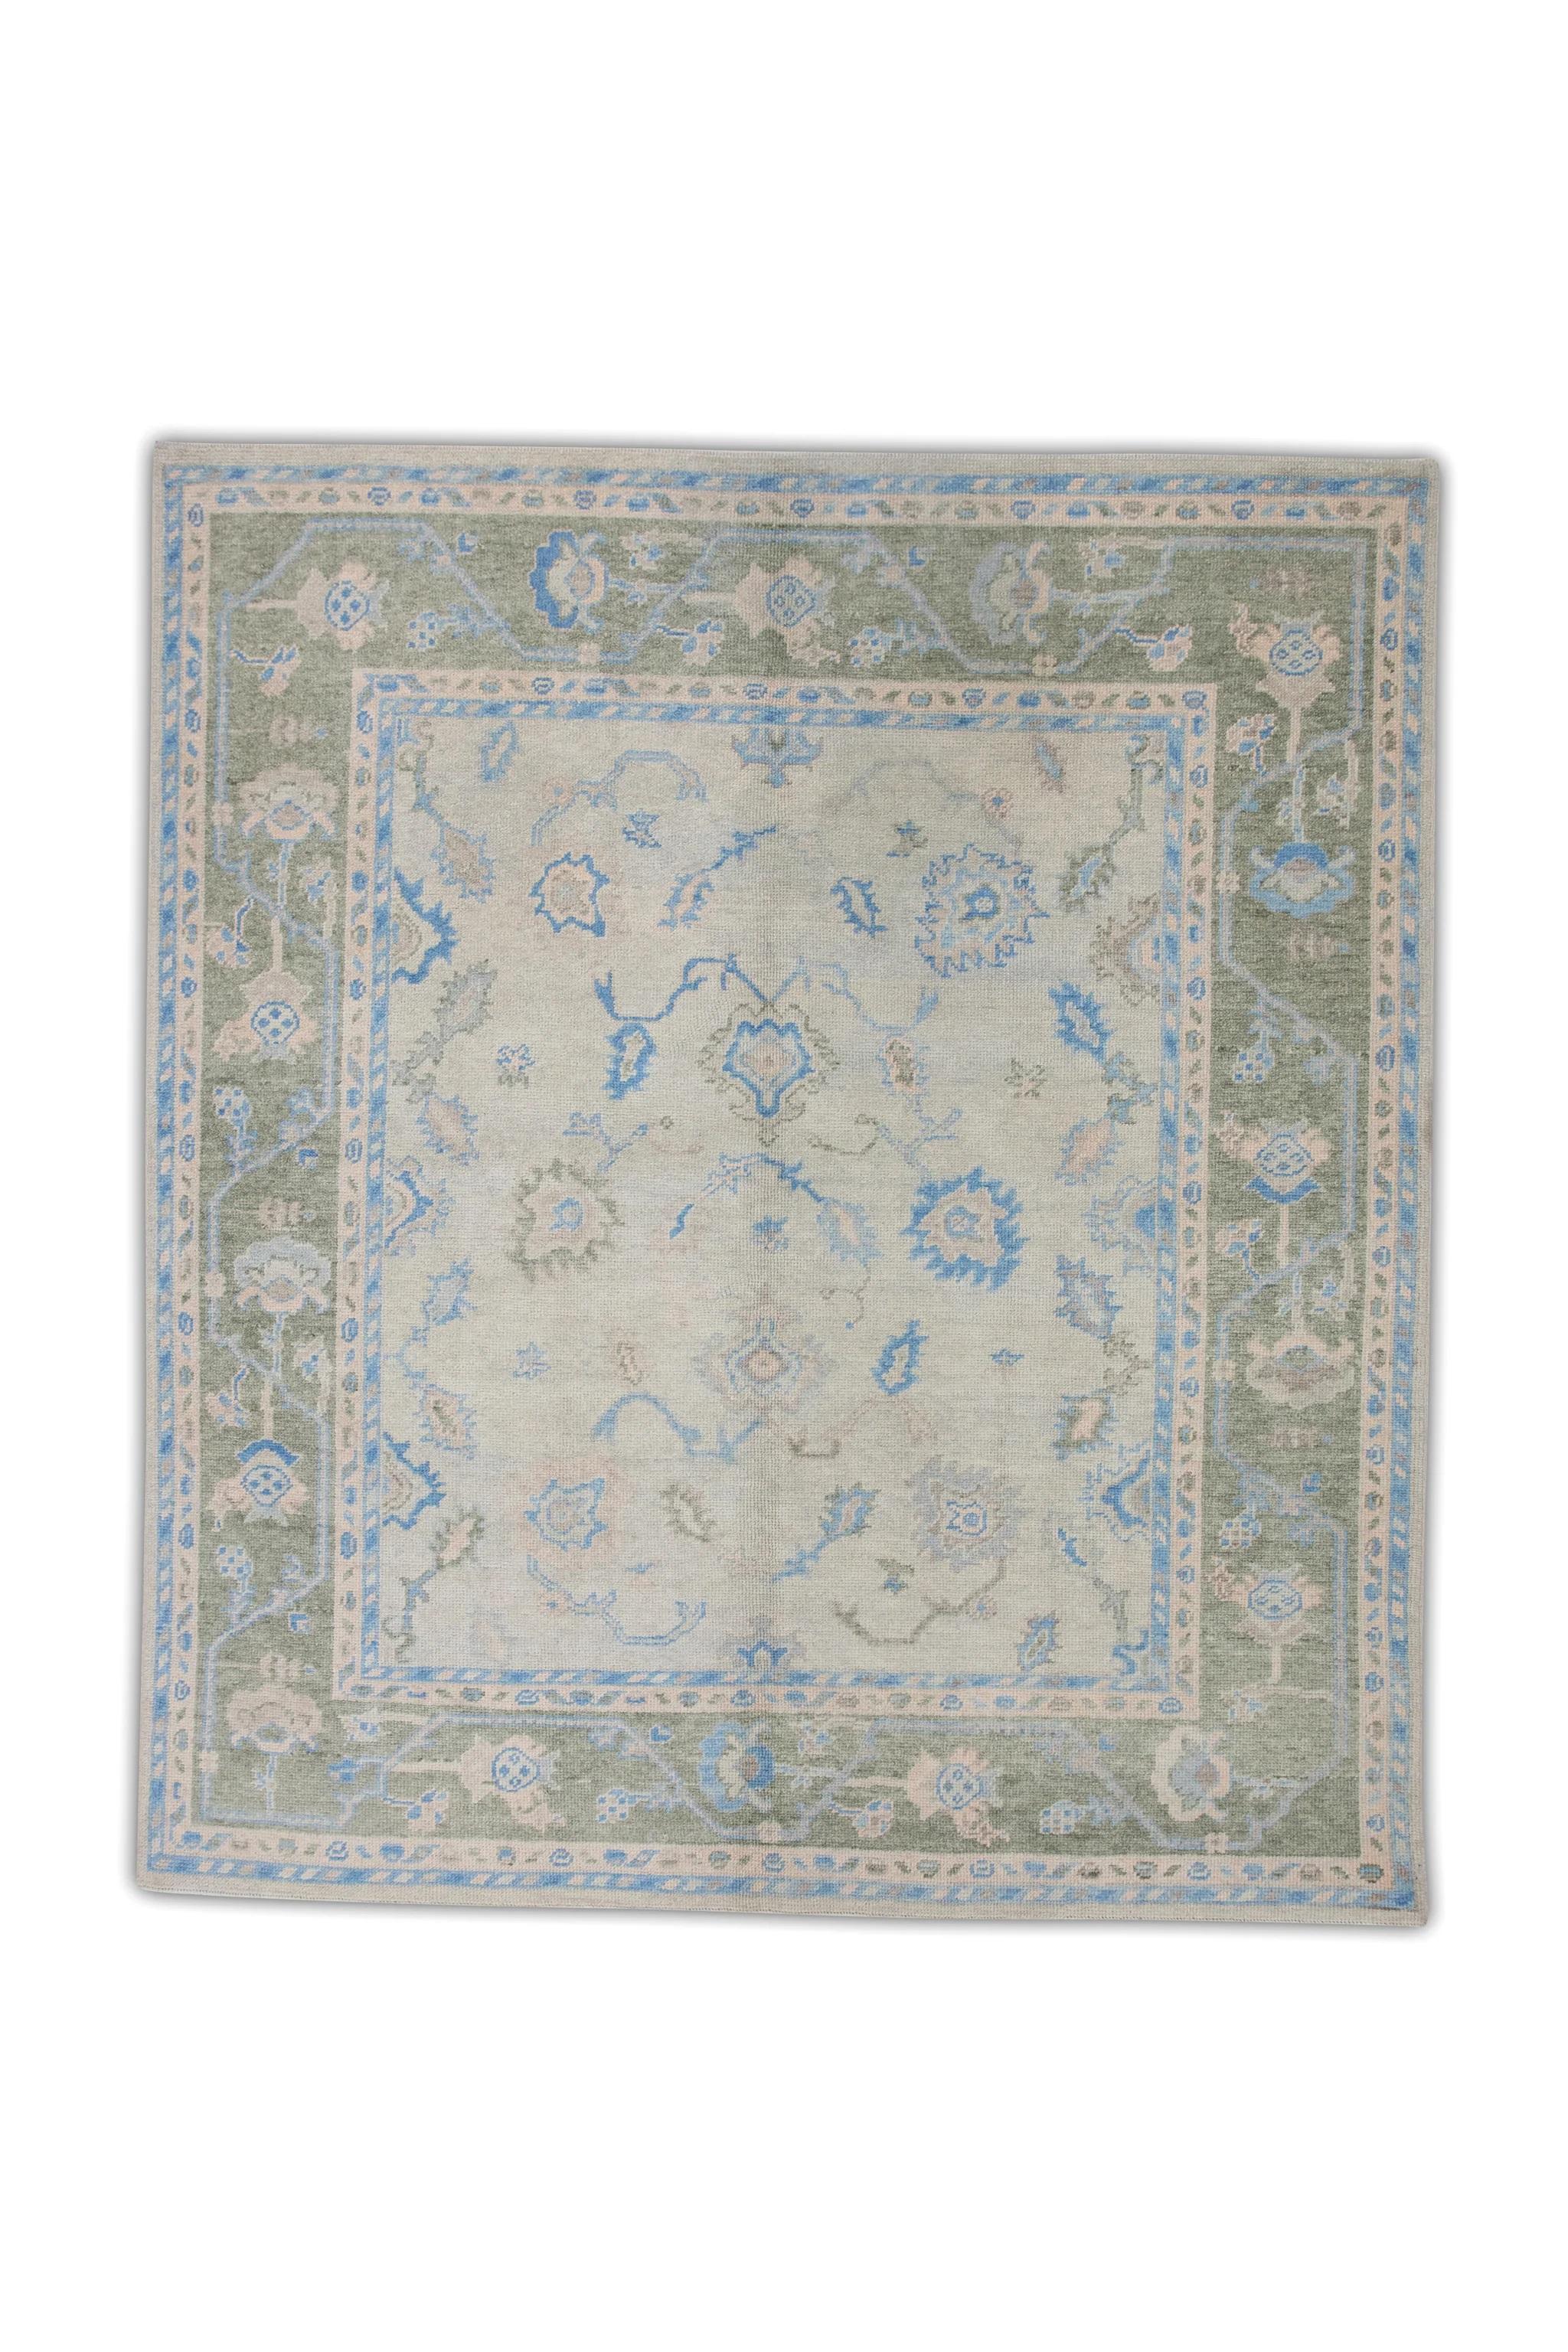 Green and Blue Floral Pattern Handwoven Wool Turkish Oushak Rug 6'10